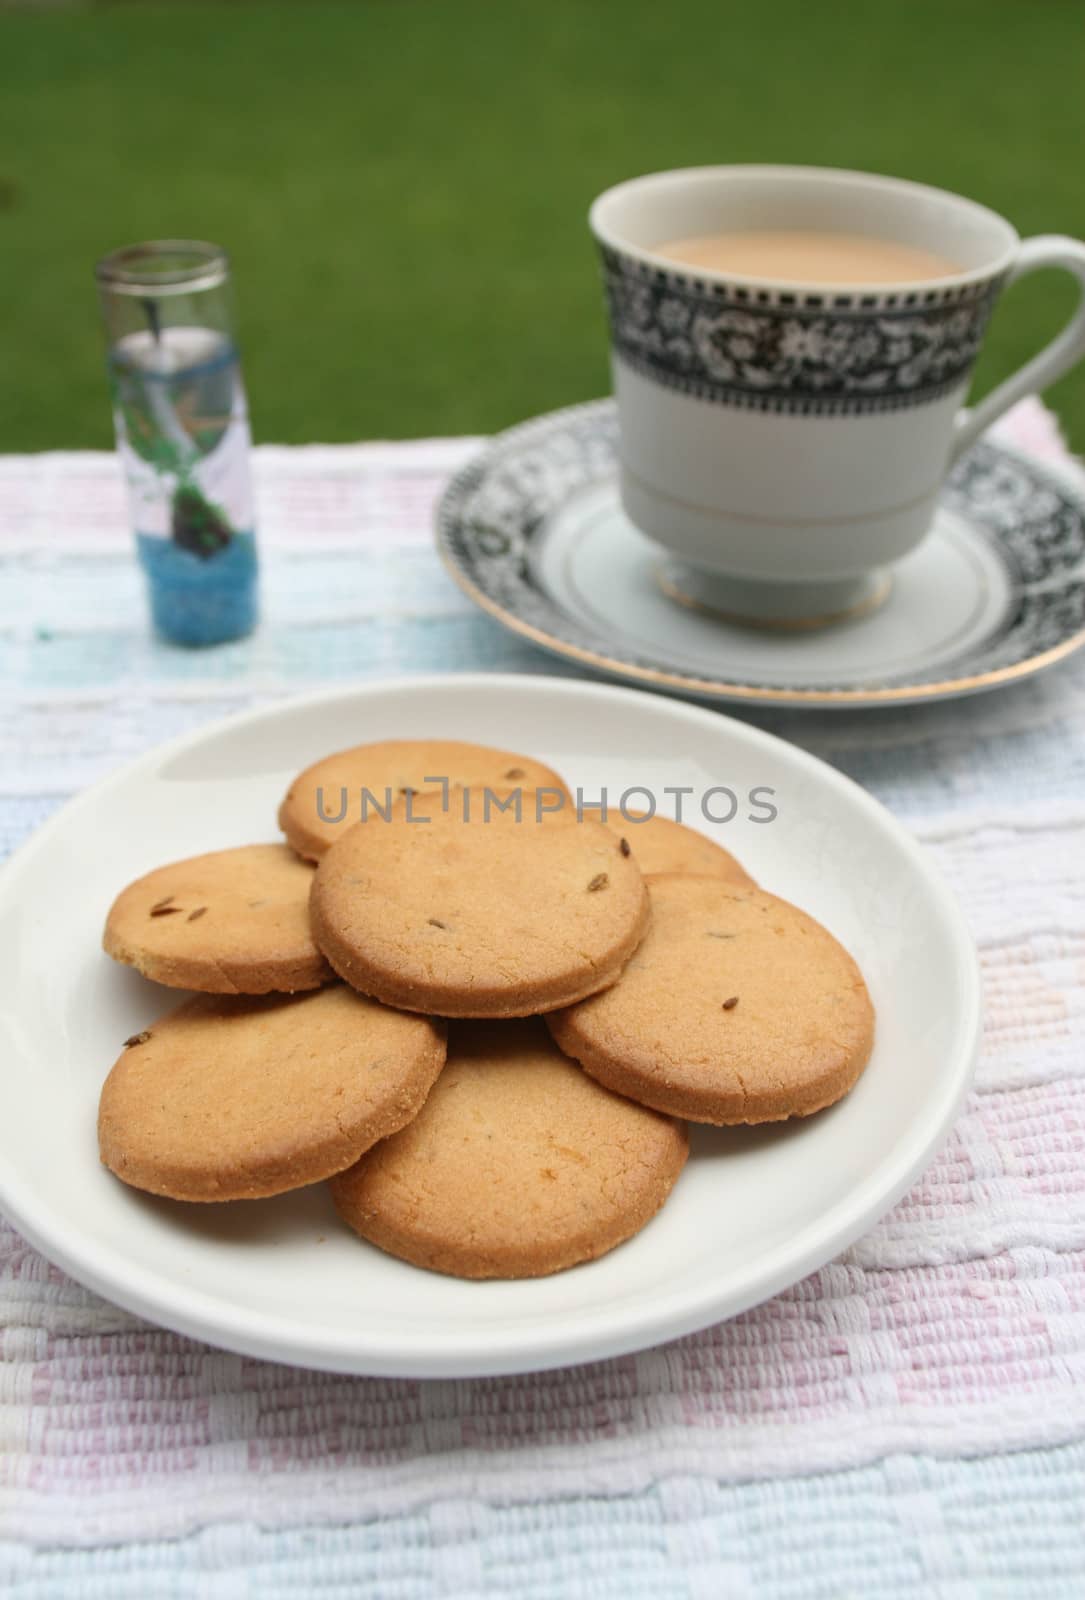 Morning tea outdoor with biscuits by haiderazim